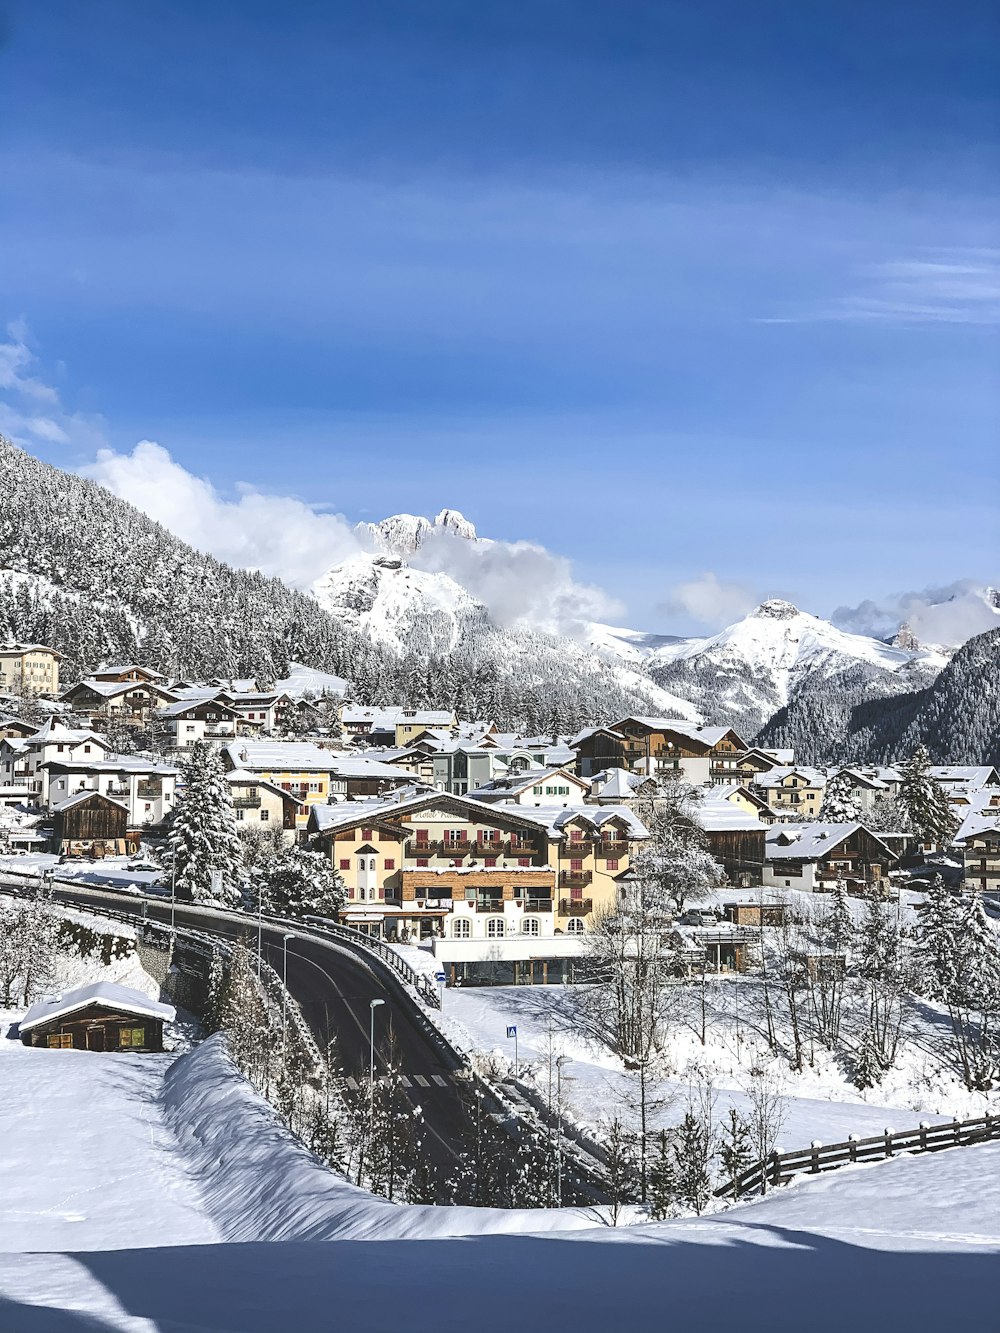 a snow covered mountain town with a bridge in the foreground